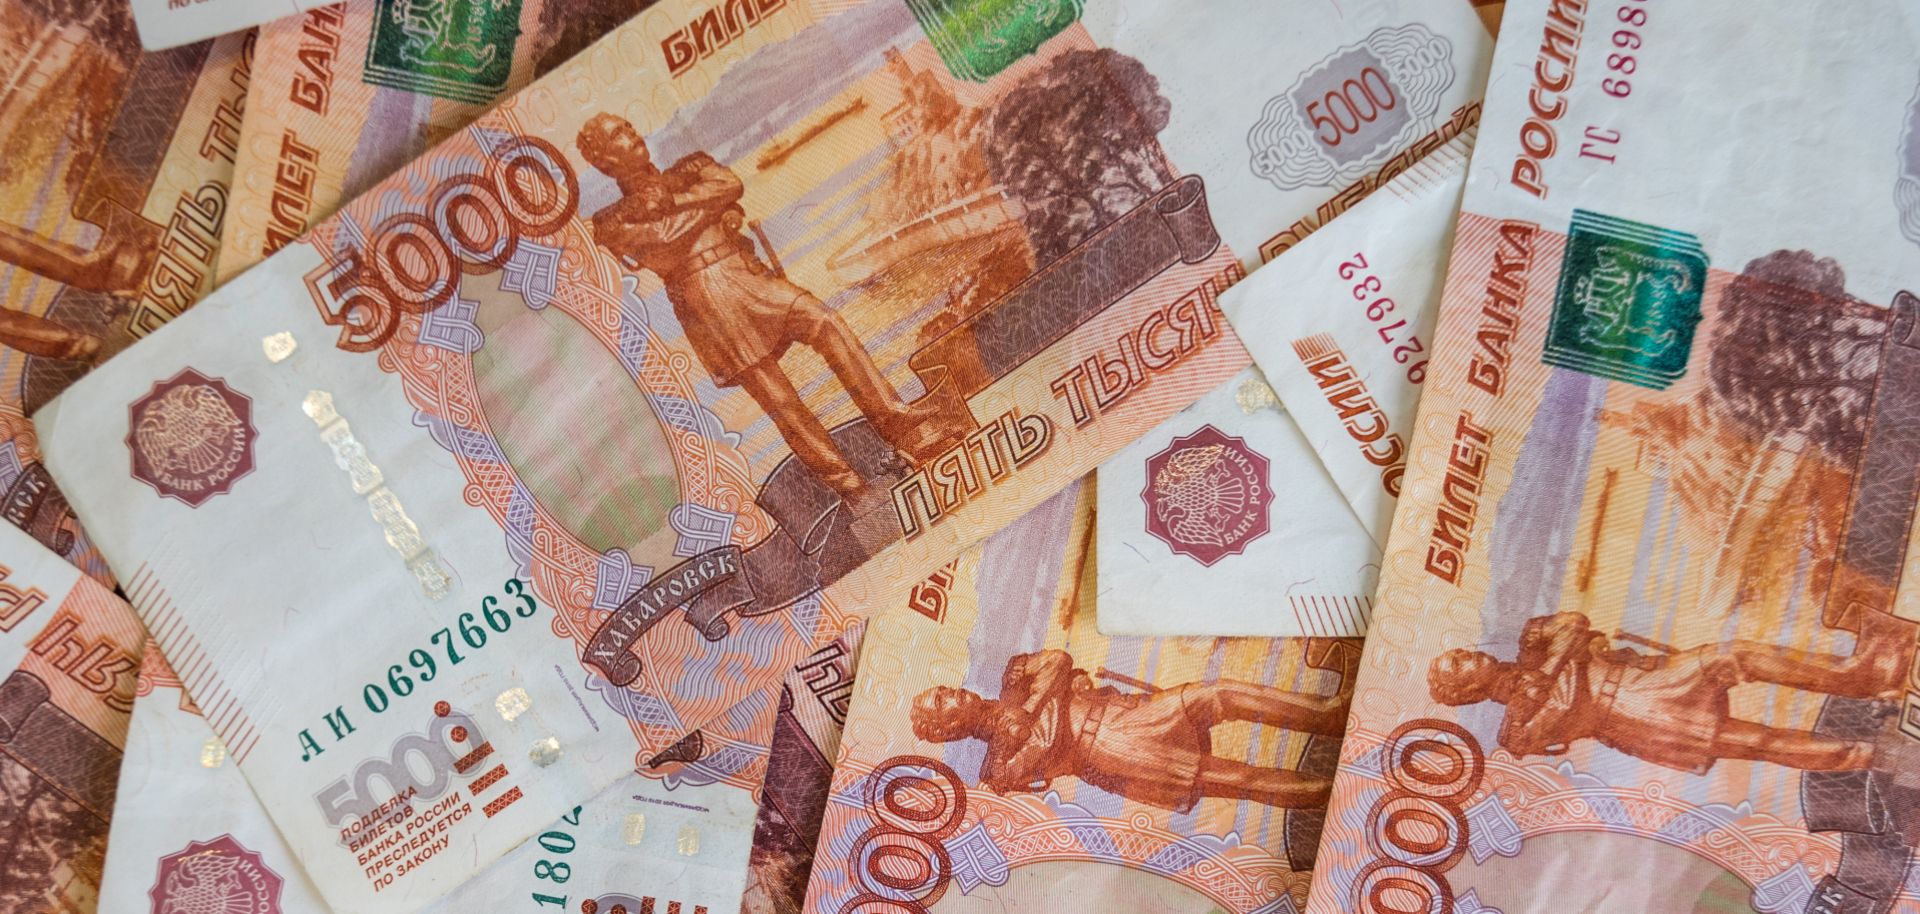 This photo is a close-up shot of Russian ruble banknotes.